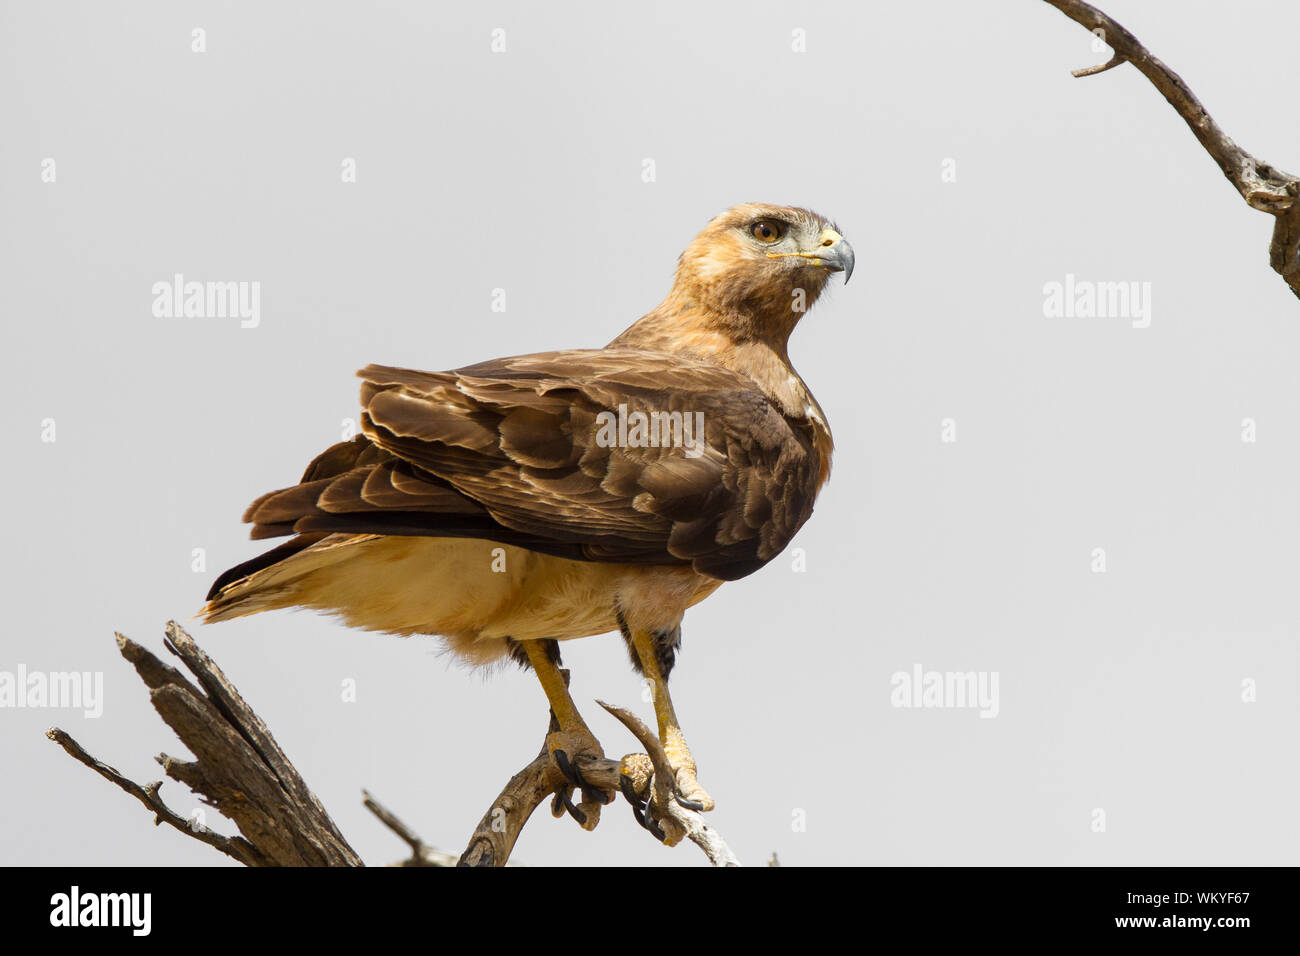 A steppe buzzard, I think, high in the stale trees in Kgalagadi Transfrontier Park, South Africa. Stock Photo